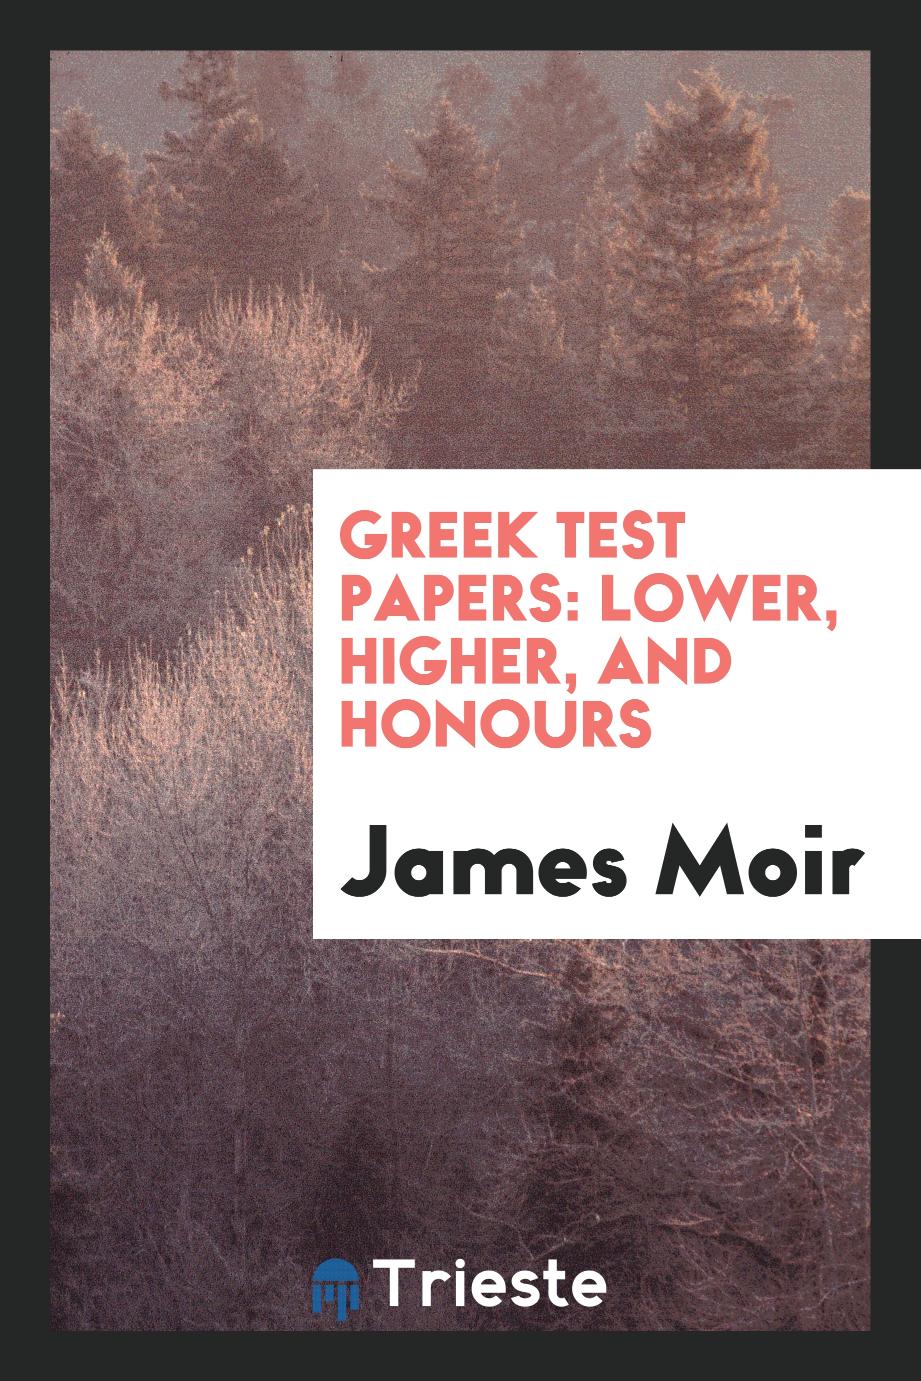 Greek Test Papers: Lower, Higher, and Honours